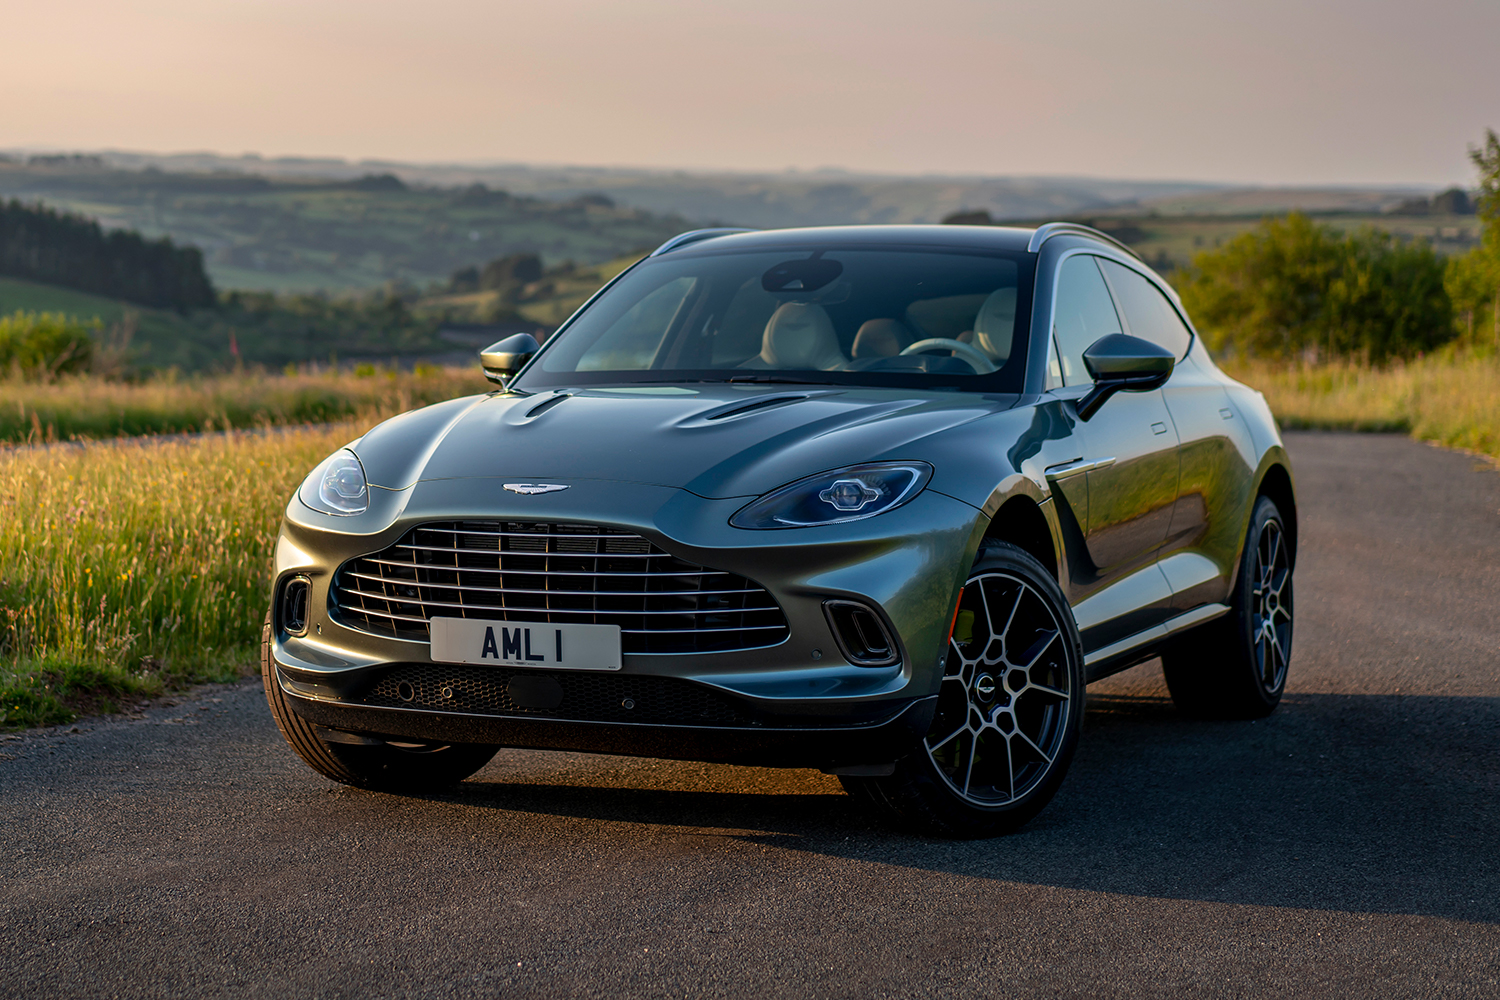 The 2021 Aston Martin DBX SUV in green in the countryside